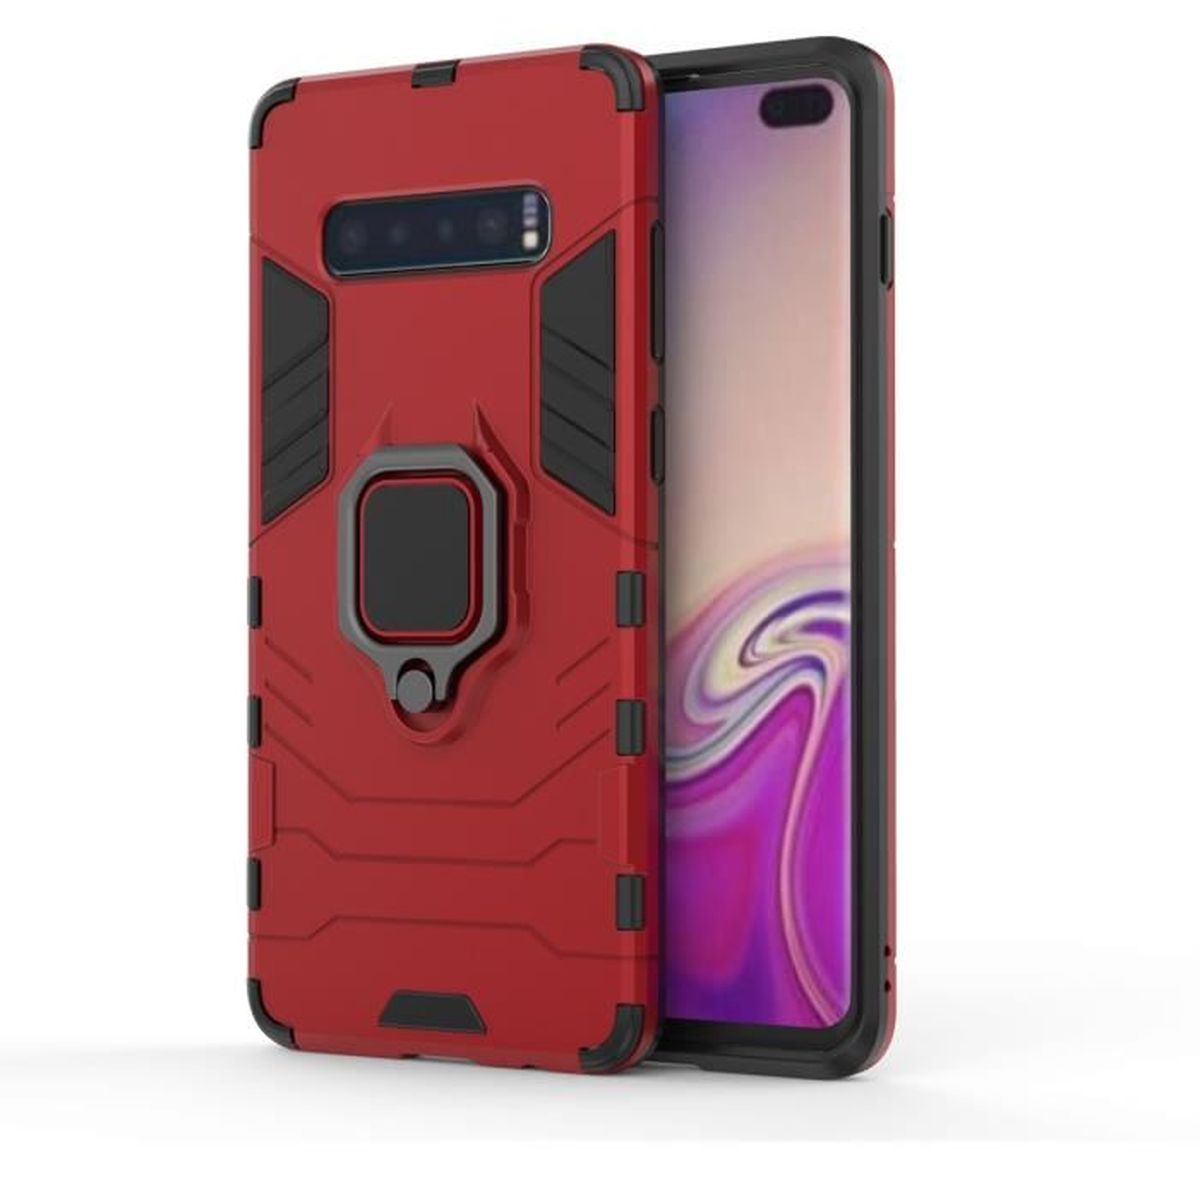 leyi coque support samsung s10